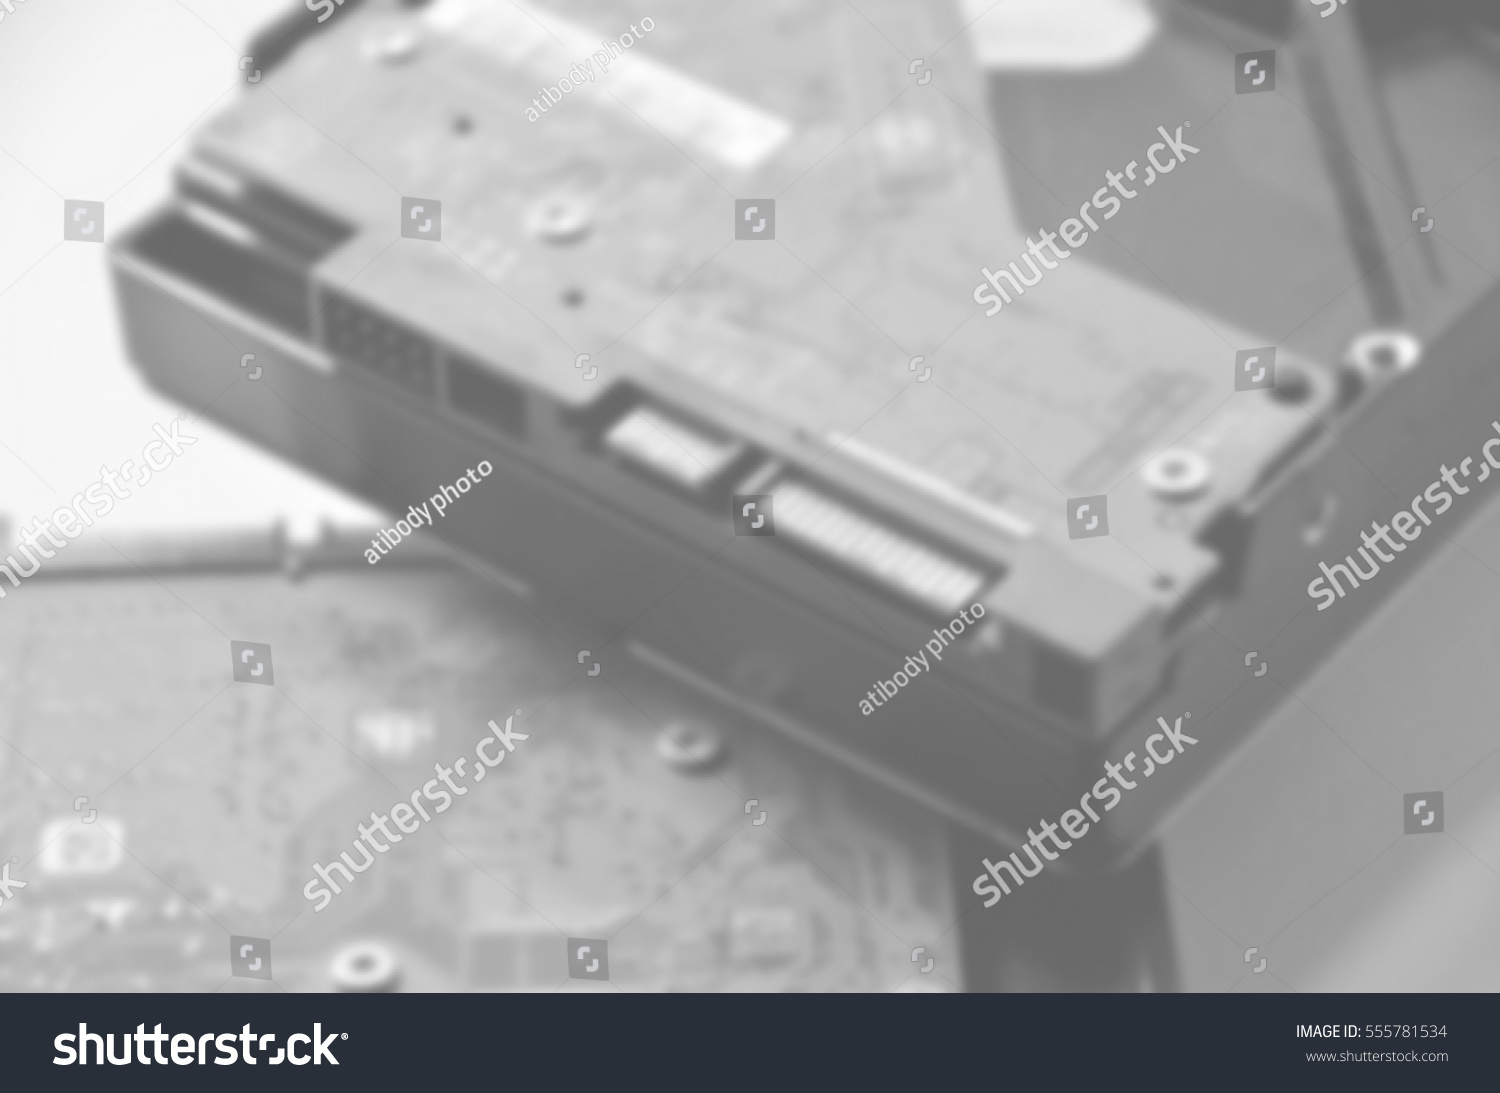 Blurred abstract background of harddisk #555781534